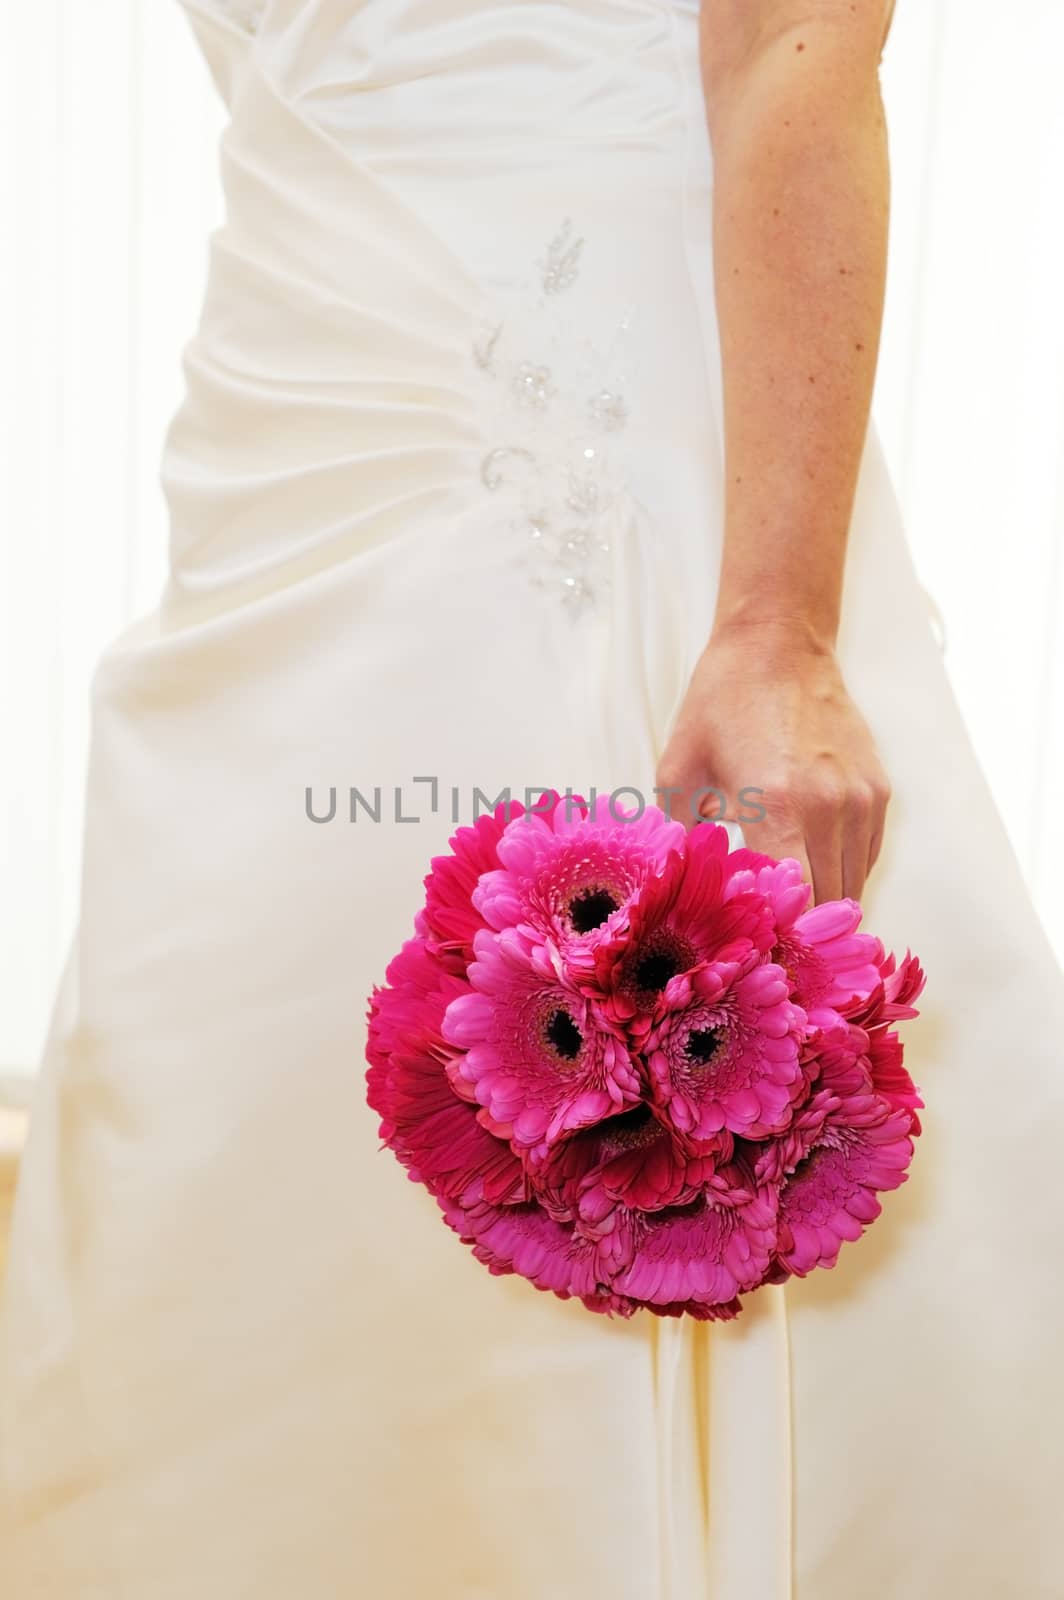 Bride holding pink bouquet by kmwphotography